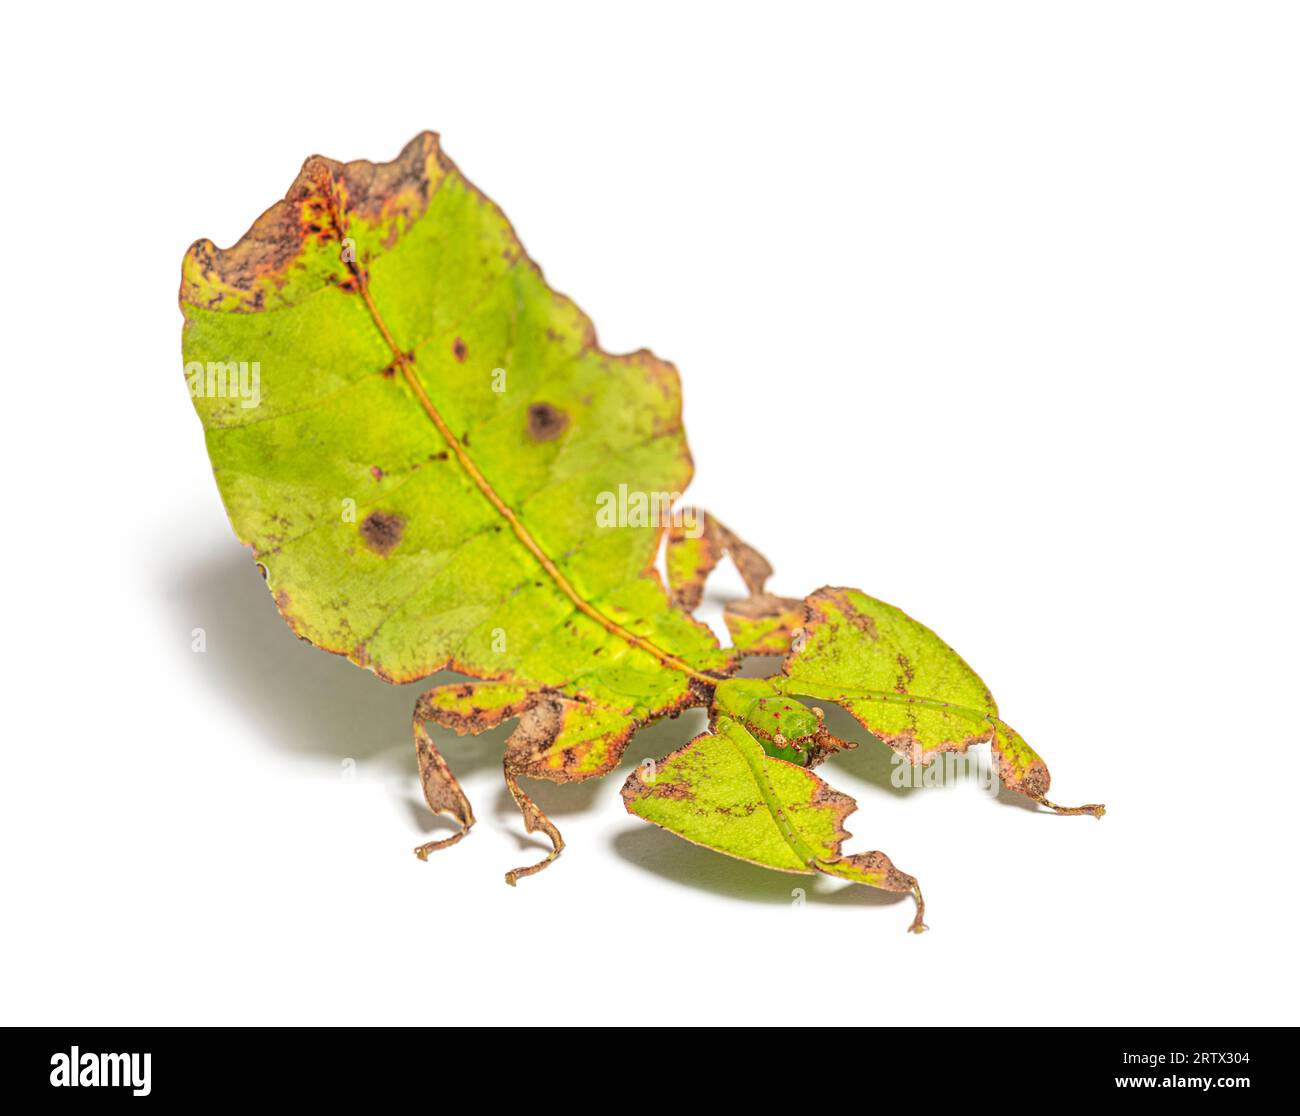 Side view of a Leaf-insect, Phyllium giganteum, isolated on white Stock Photo